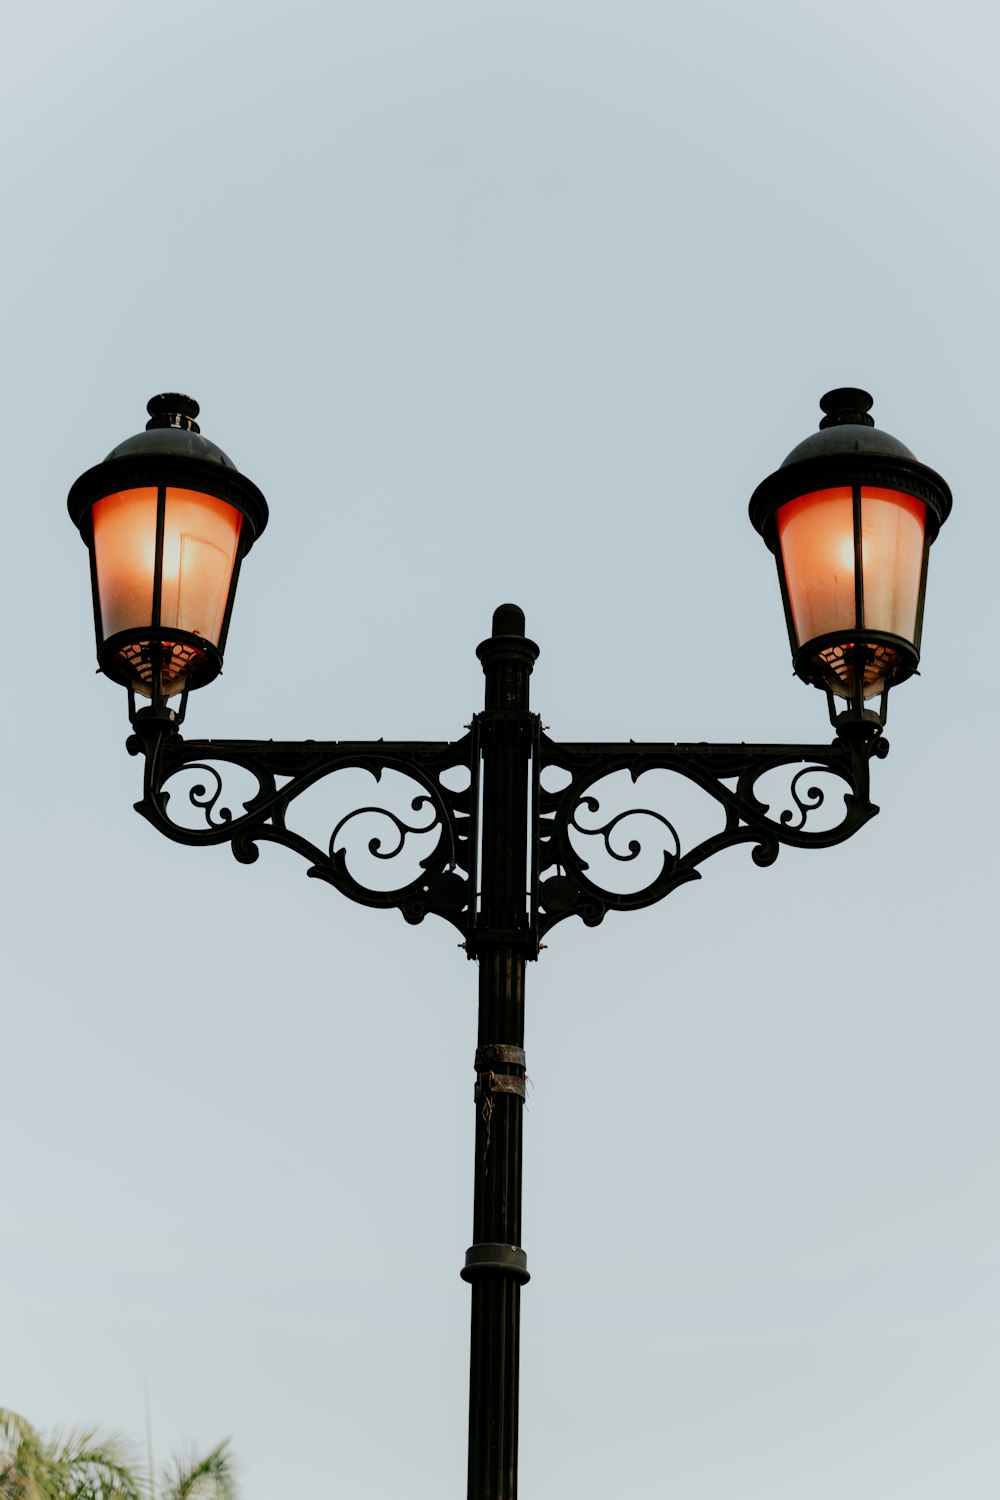 a lamp post with two lights on top of it